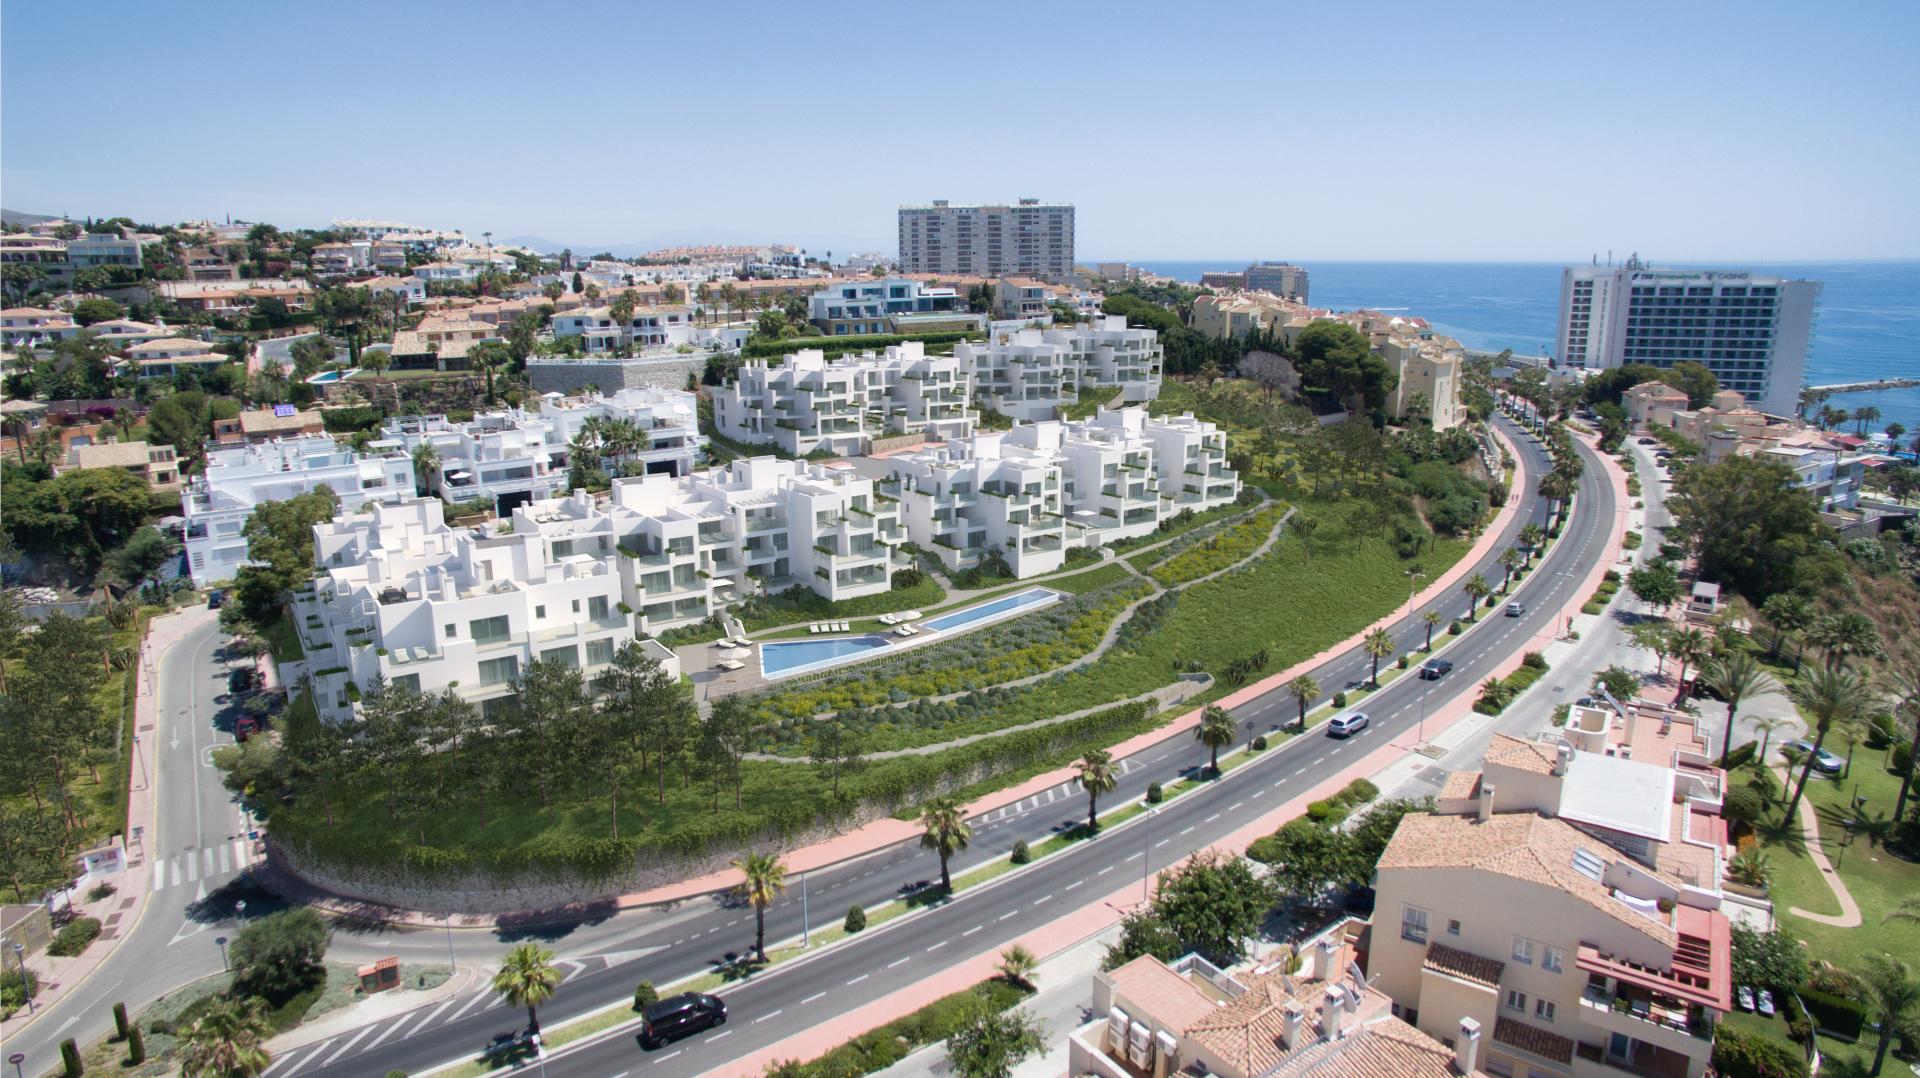 90 contemporary homes with excellent fittings and finishes, and the beach onyour doorstep. 1, 2 and 3 bedrooms with spacious terraces and glass wallsoffering stunning uninterrupted views of the sea.